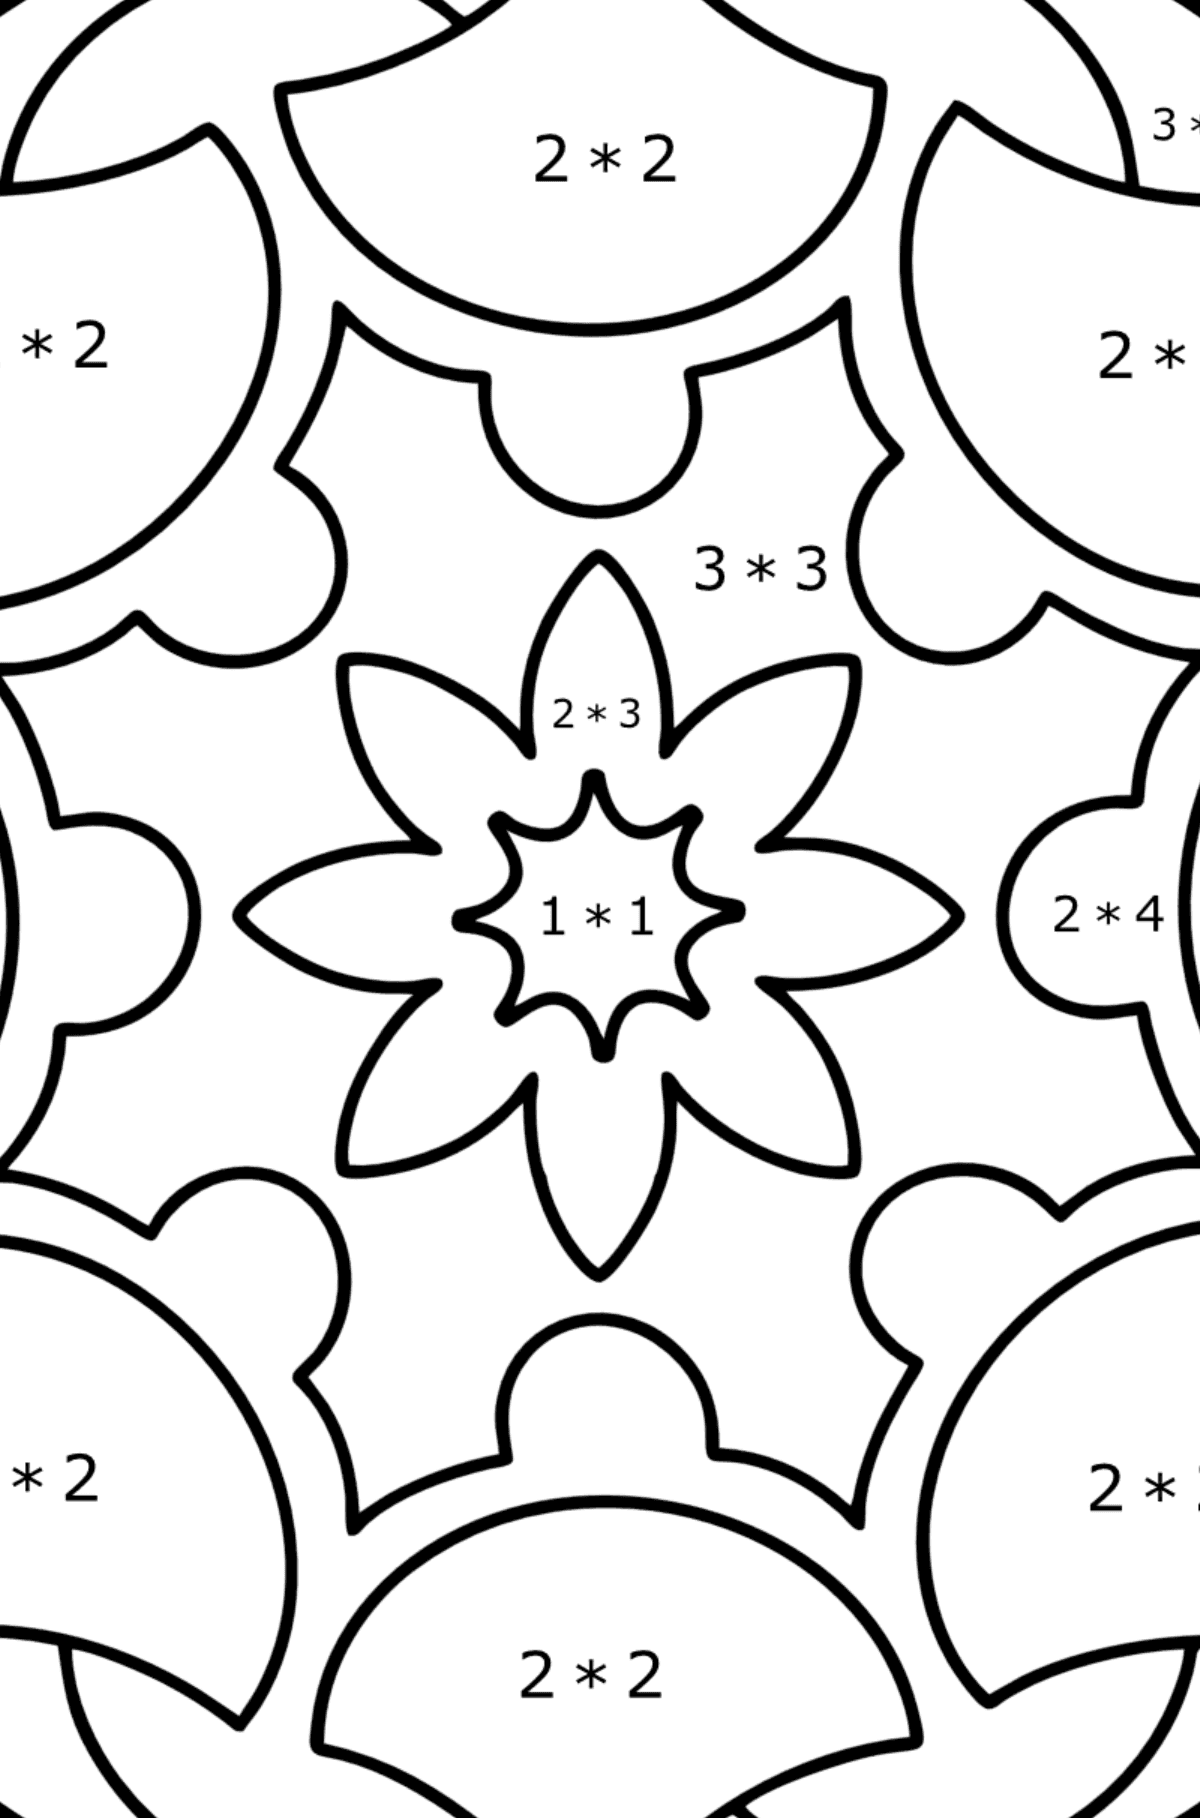 Mandala coloring page - 13 elements - Math Coloring - Multiplication for Kids